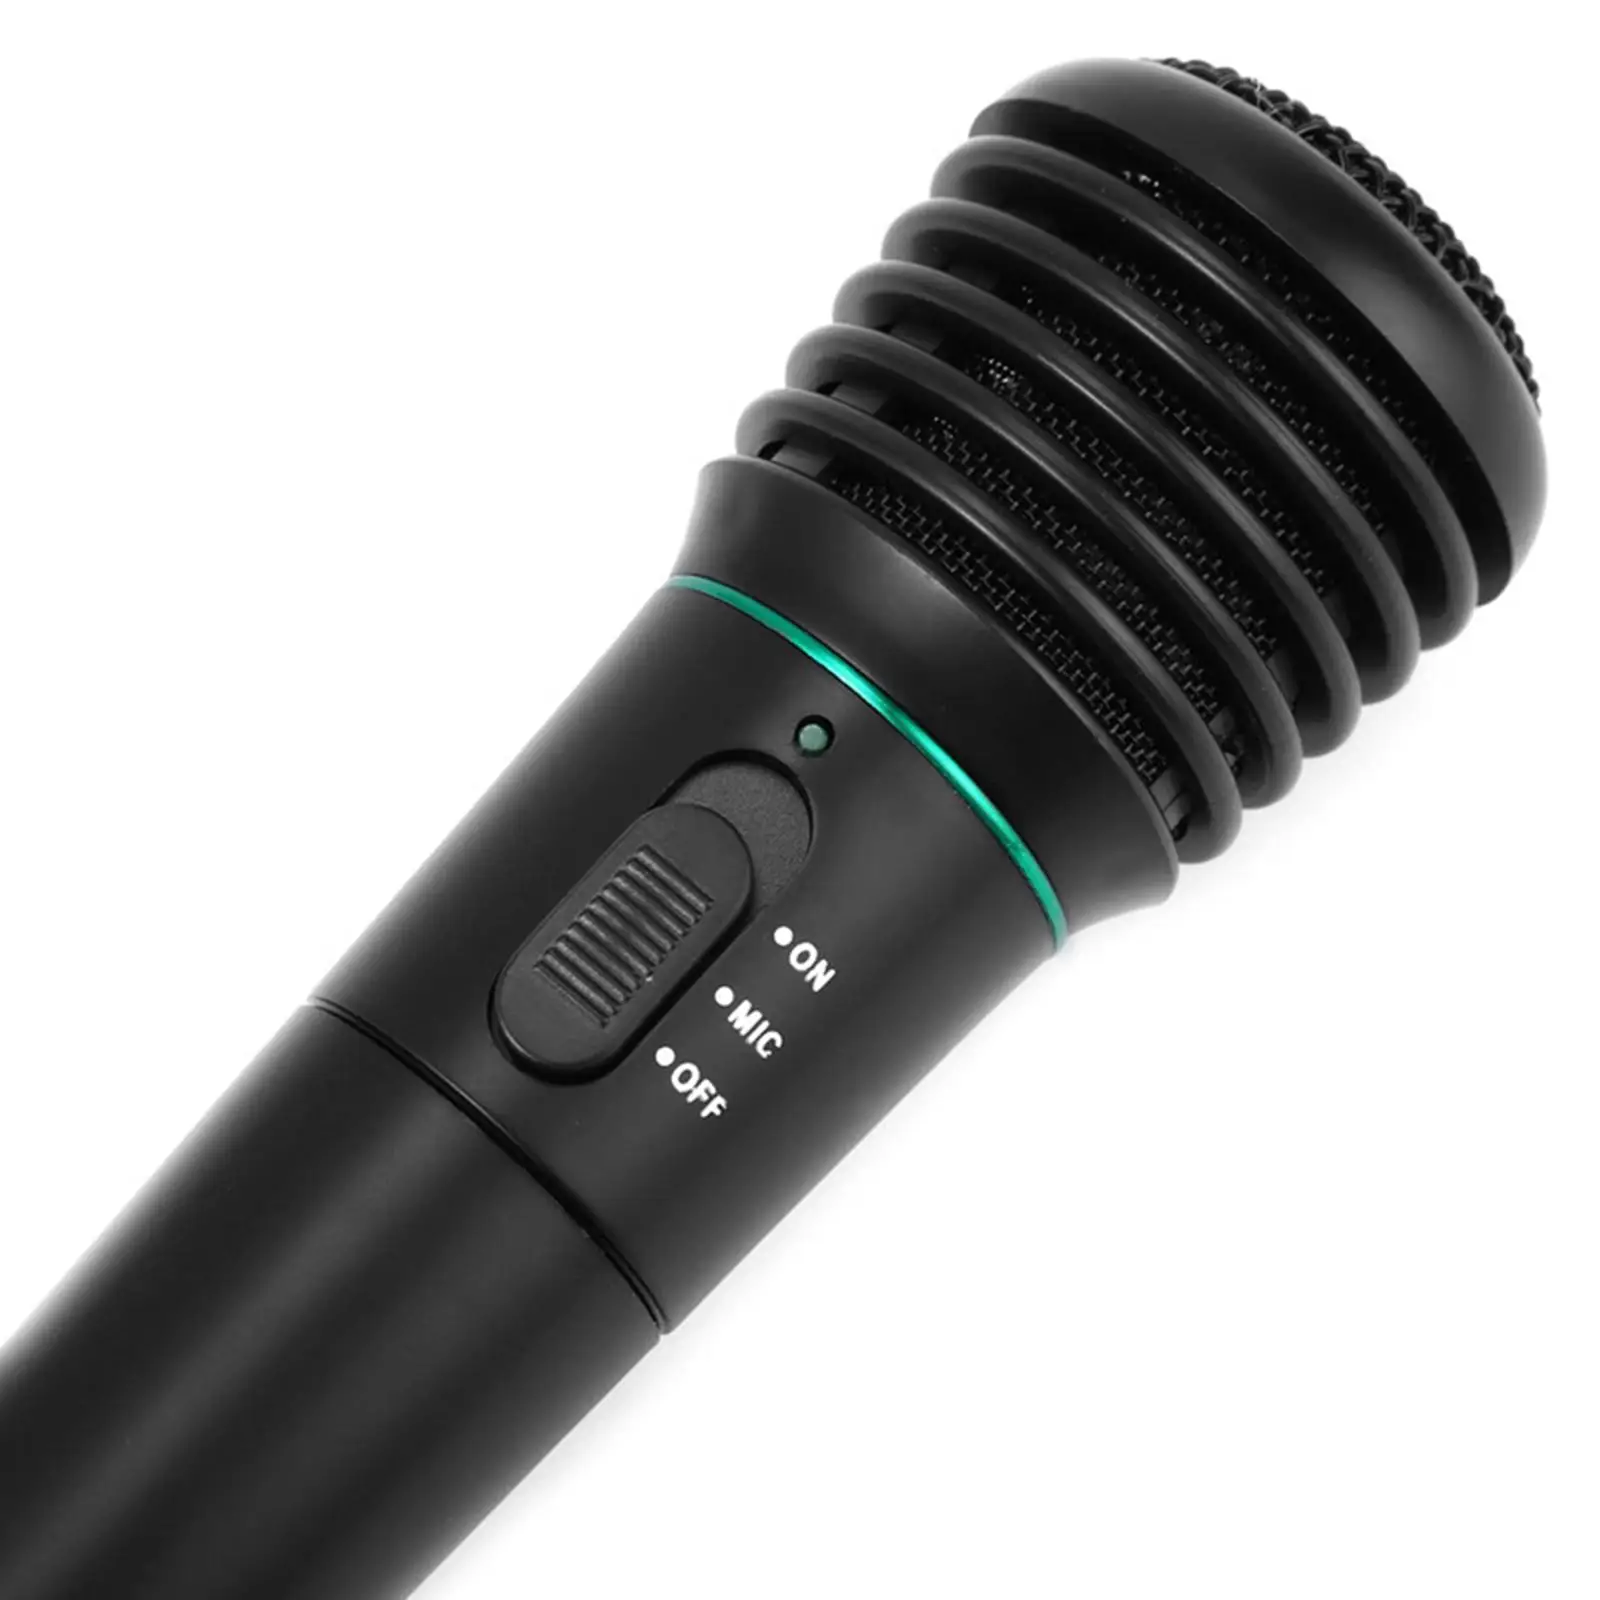 Wireless Microphones System 2 in 1 Plug and Play Durable Vocal Microphone for Karaoke Singing Desktop PC Party Meeting Amplifie